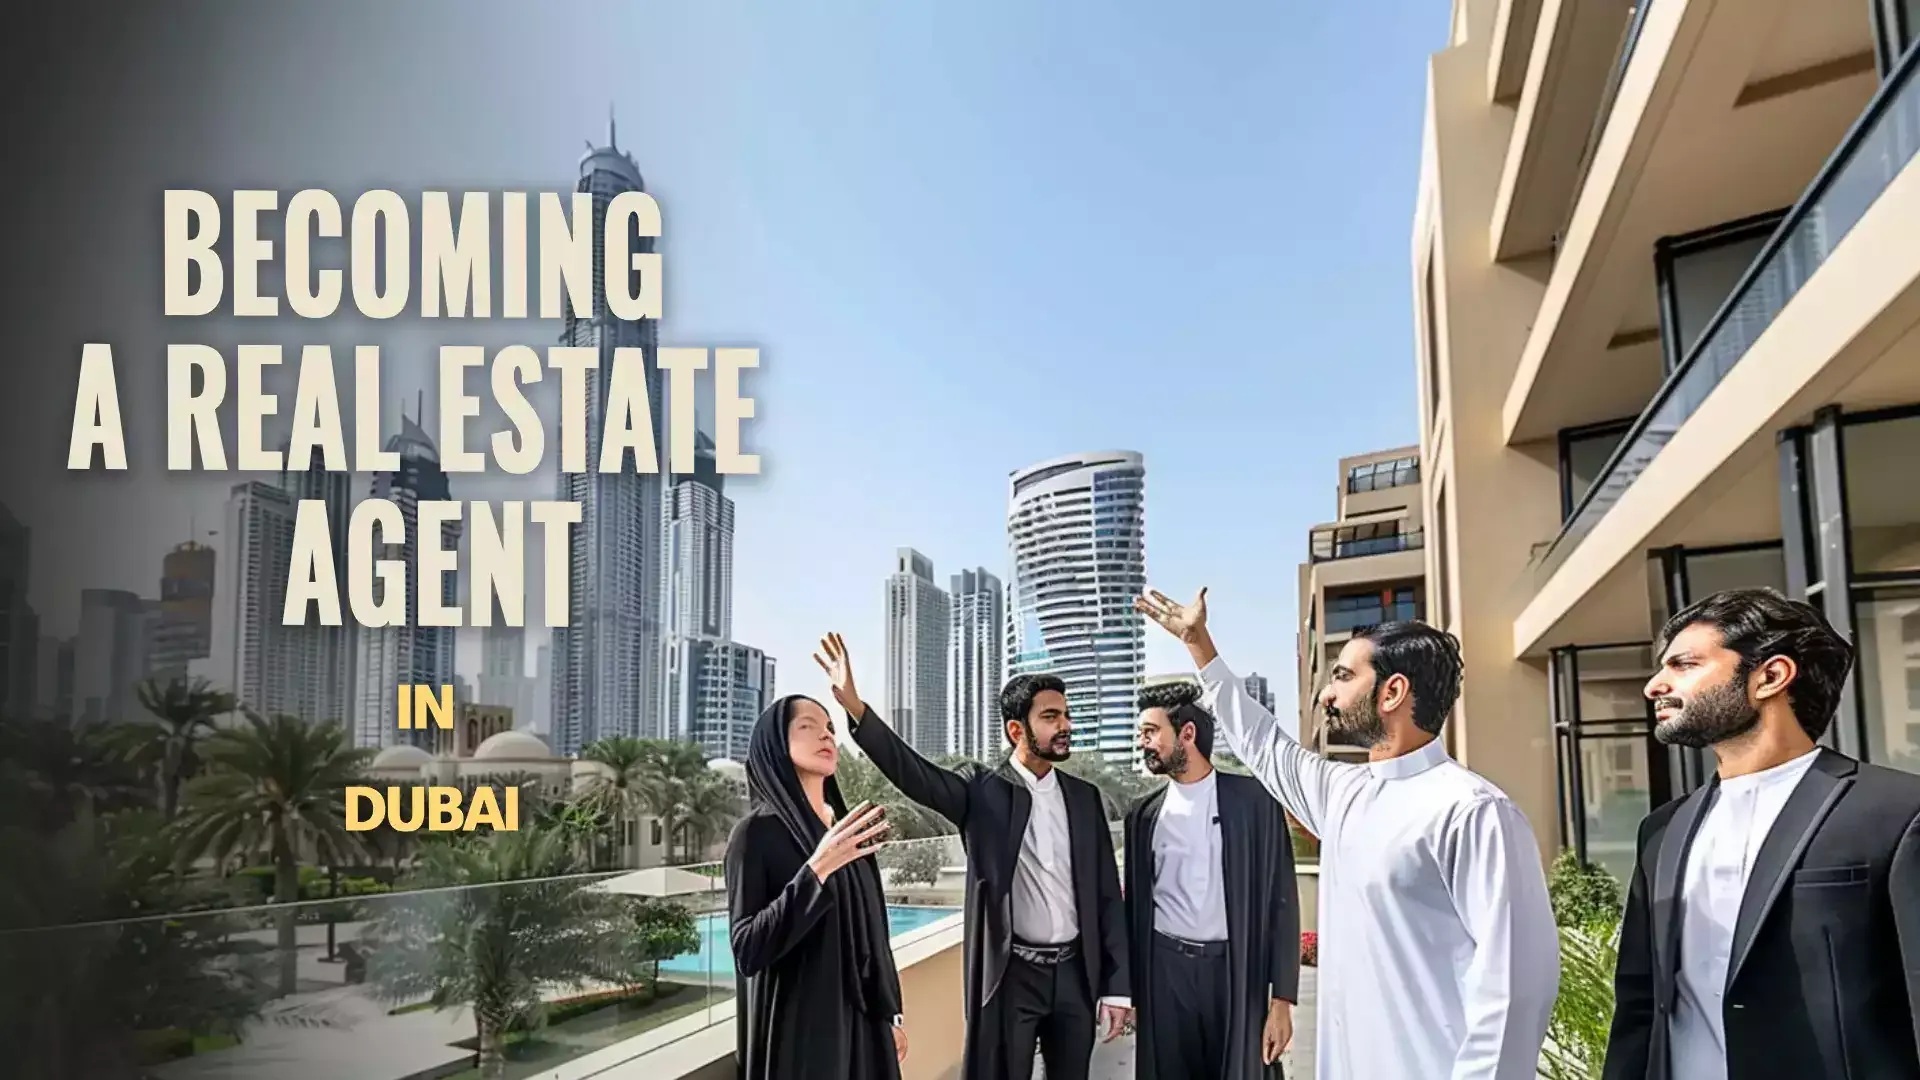 A real estate agent assisting a client in viewing properties in Dubai